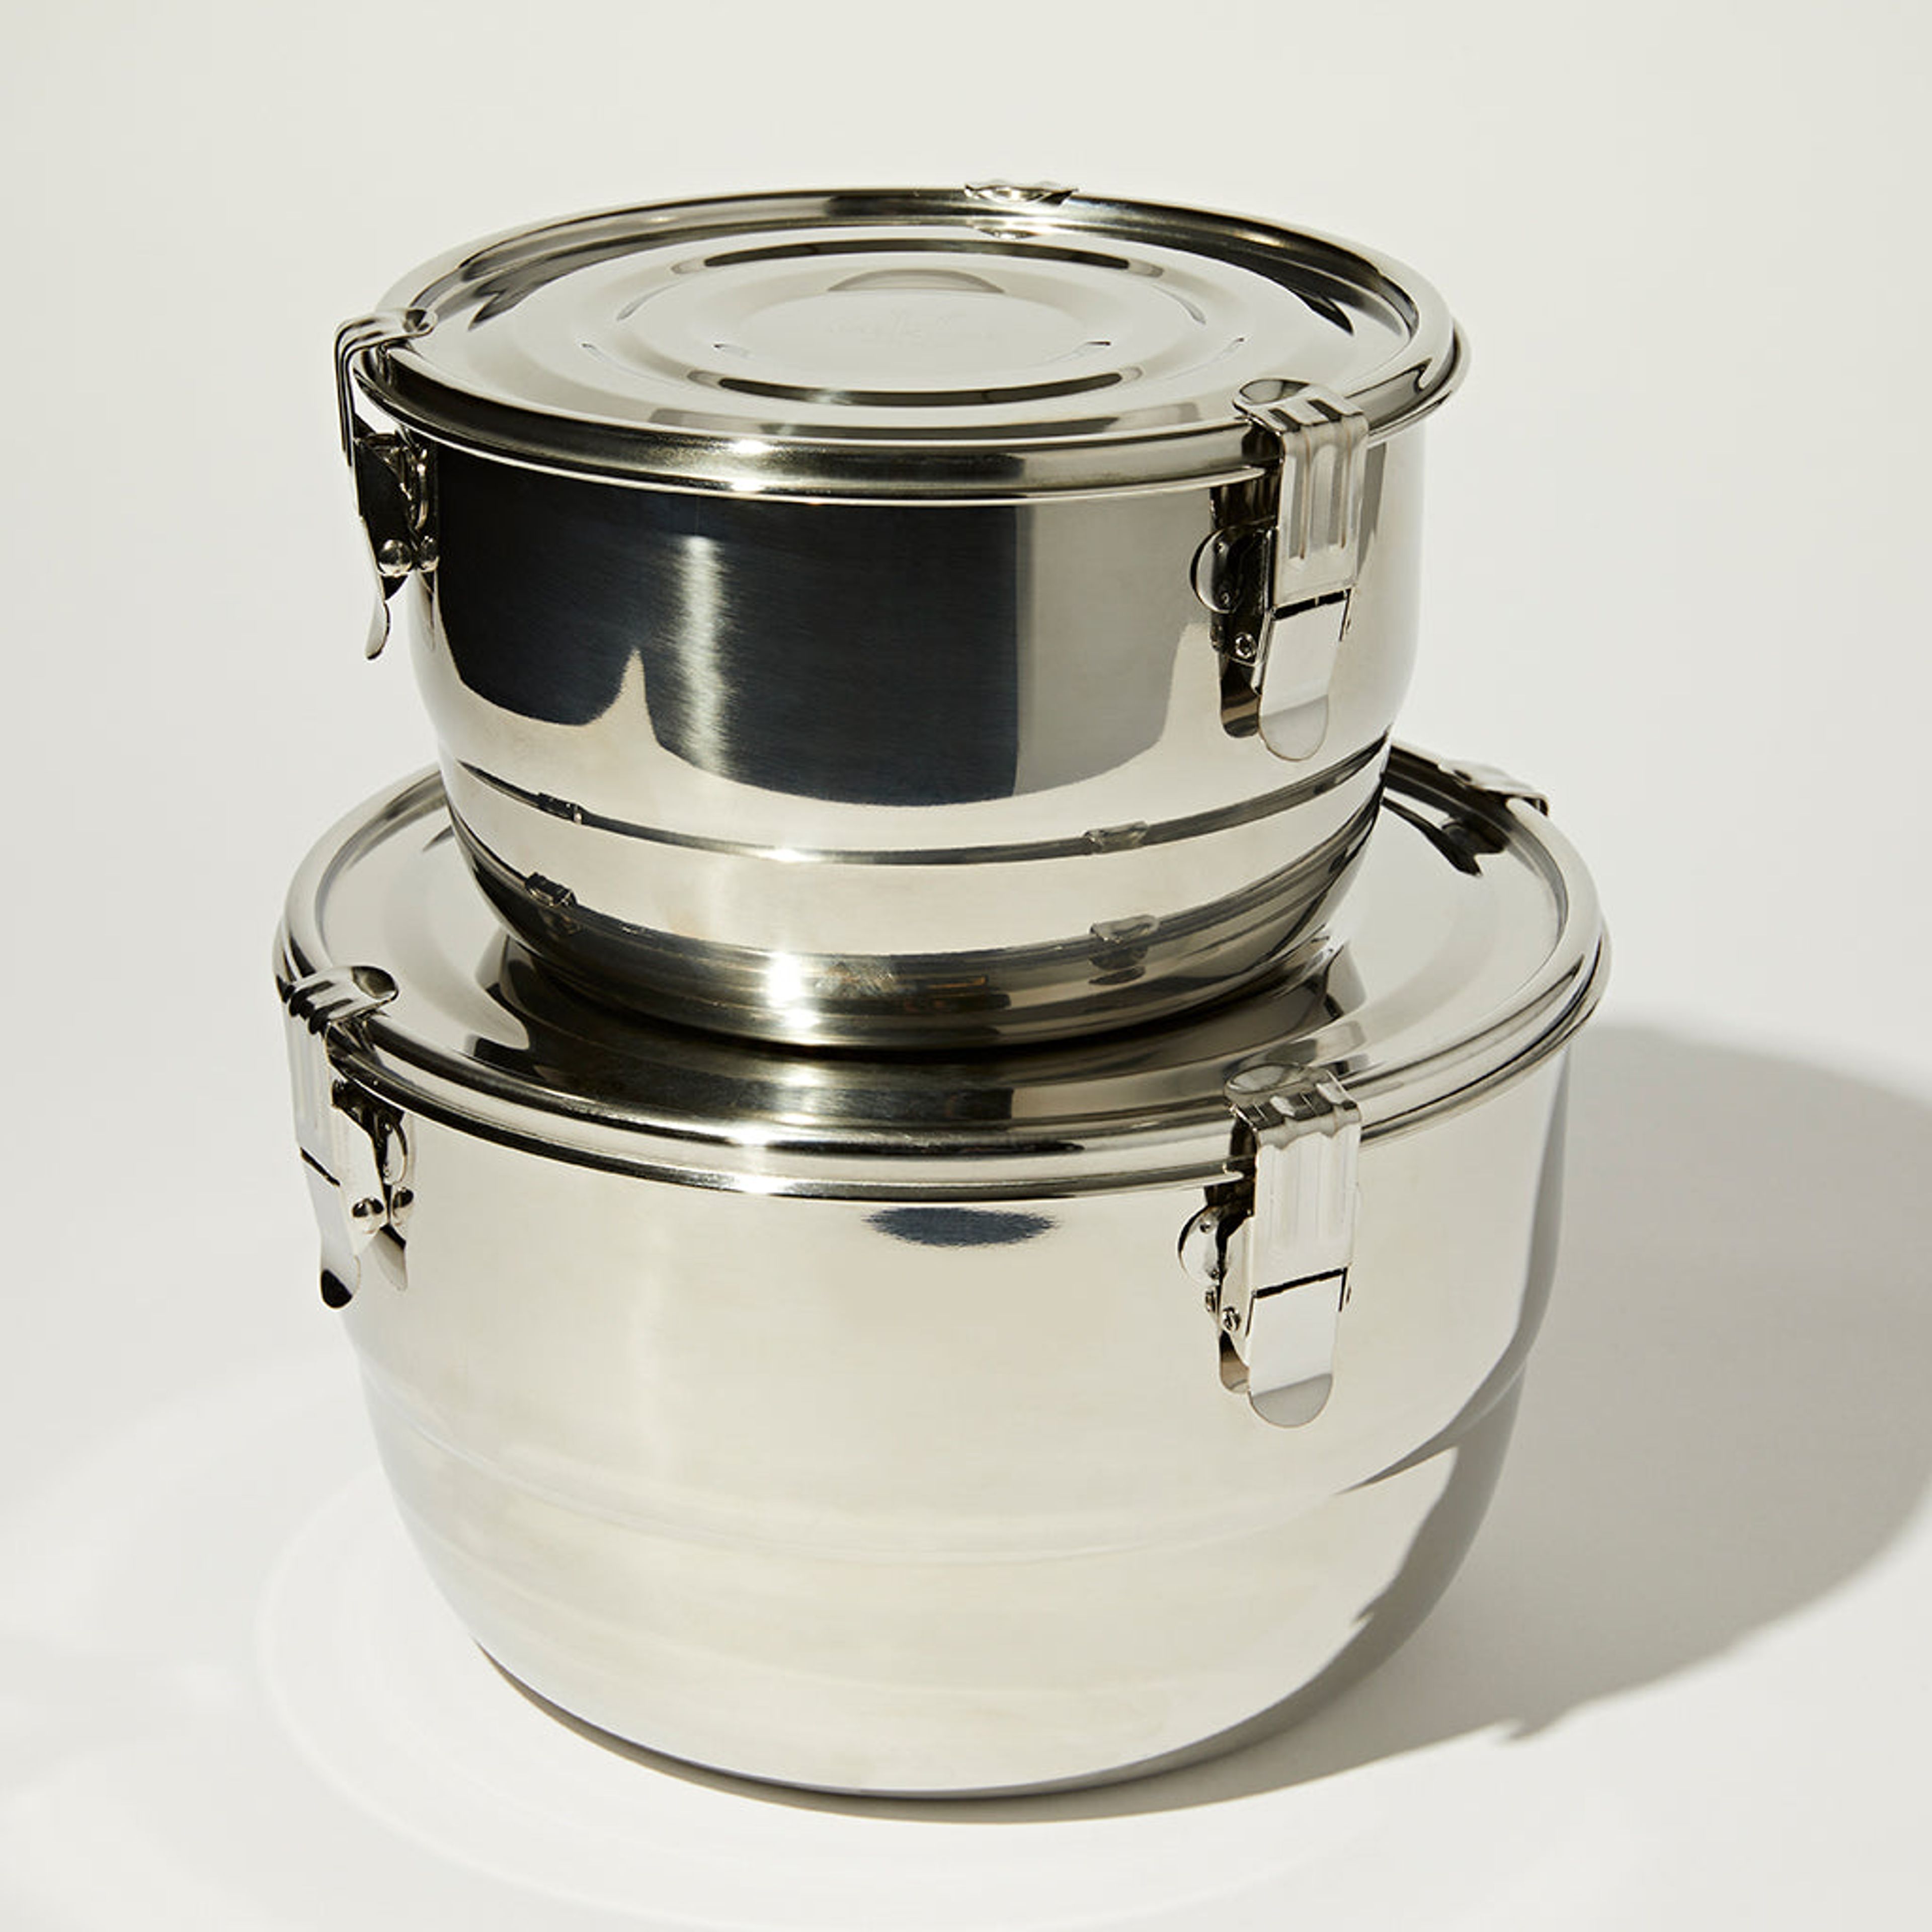 Airtight Stainless Steel Bundle - Large